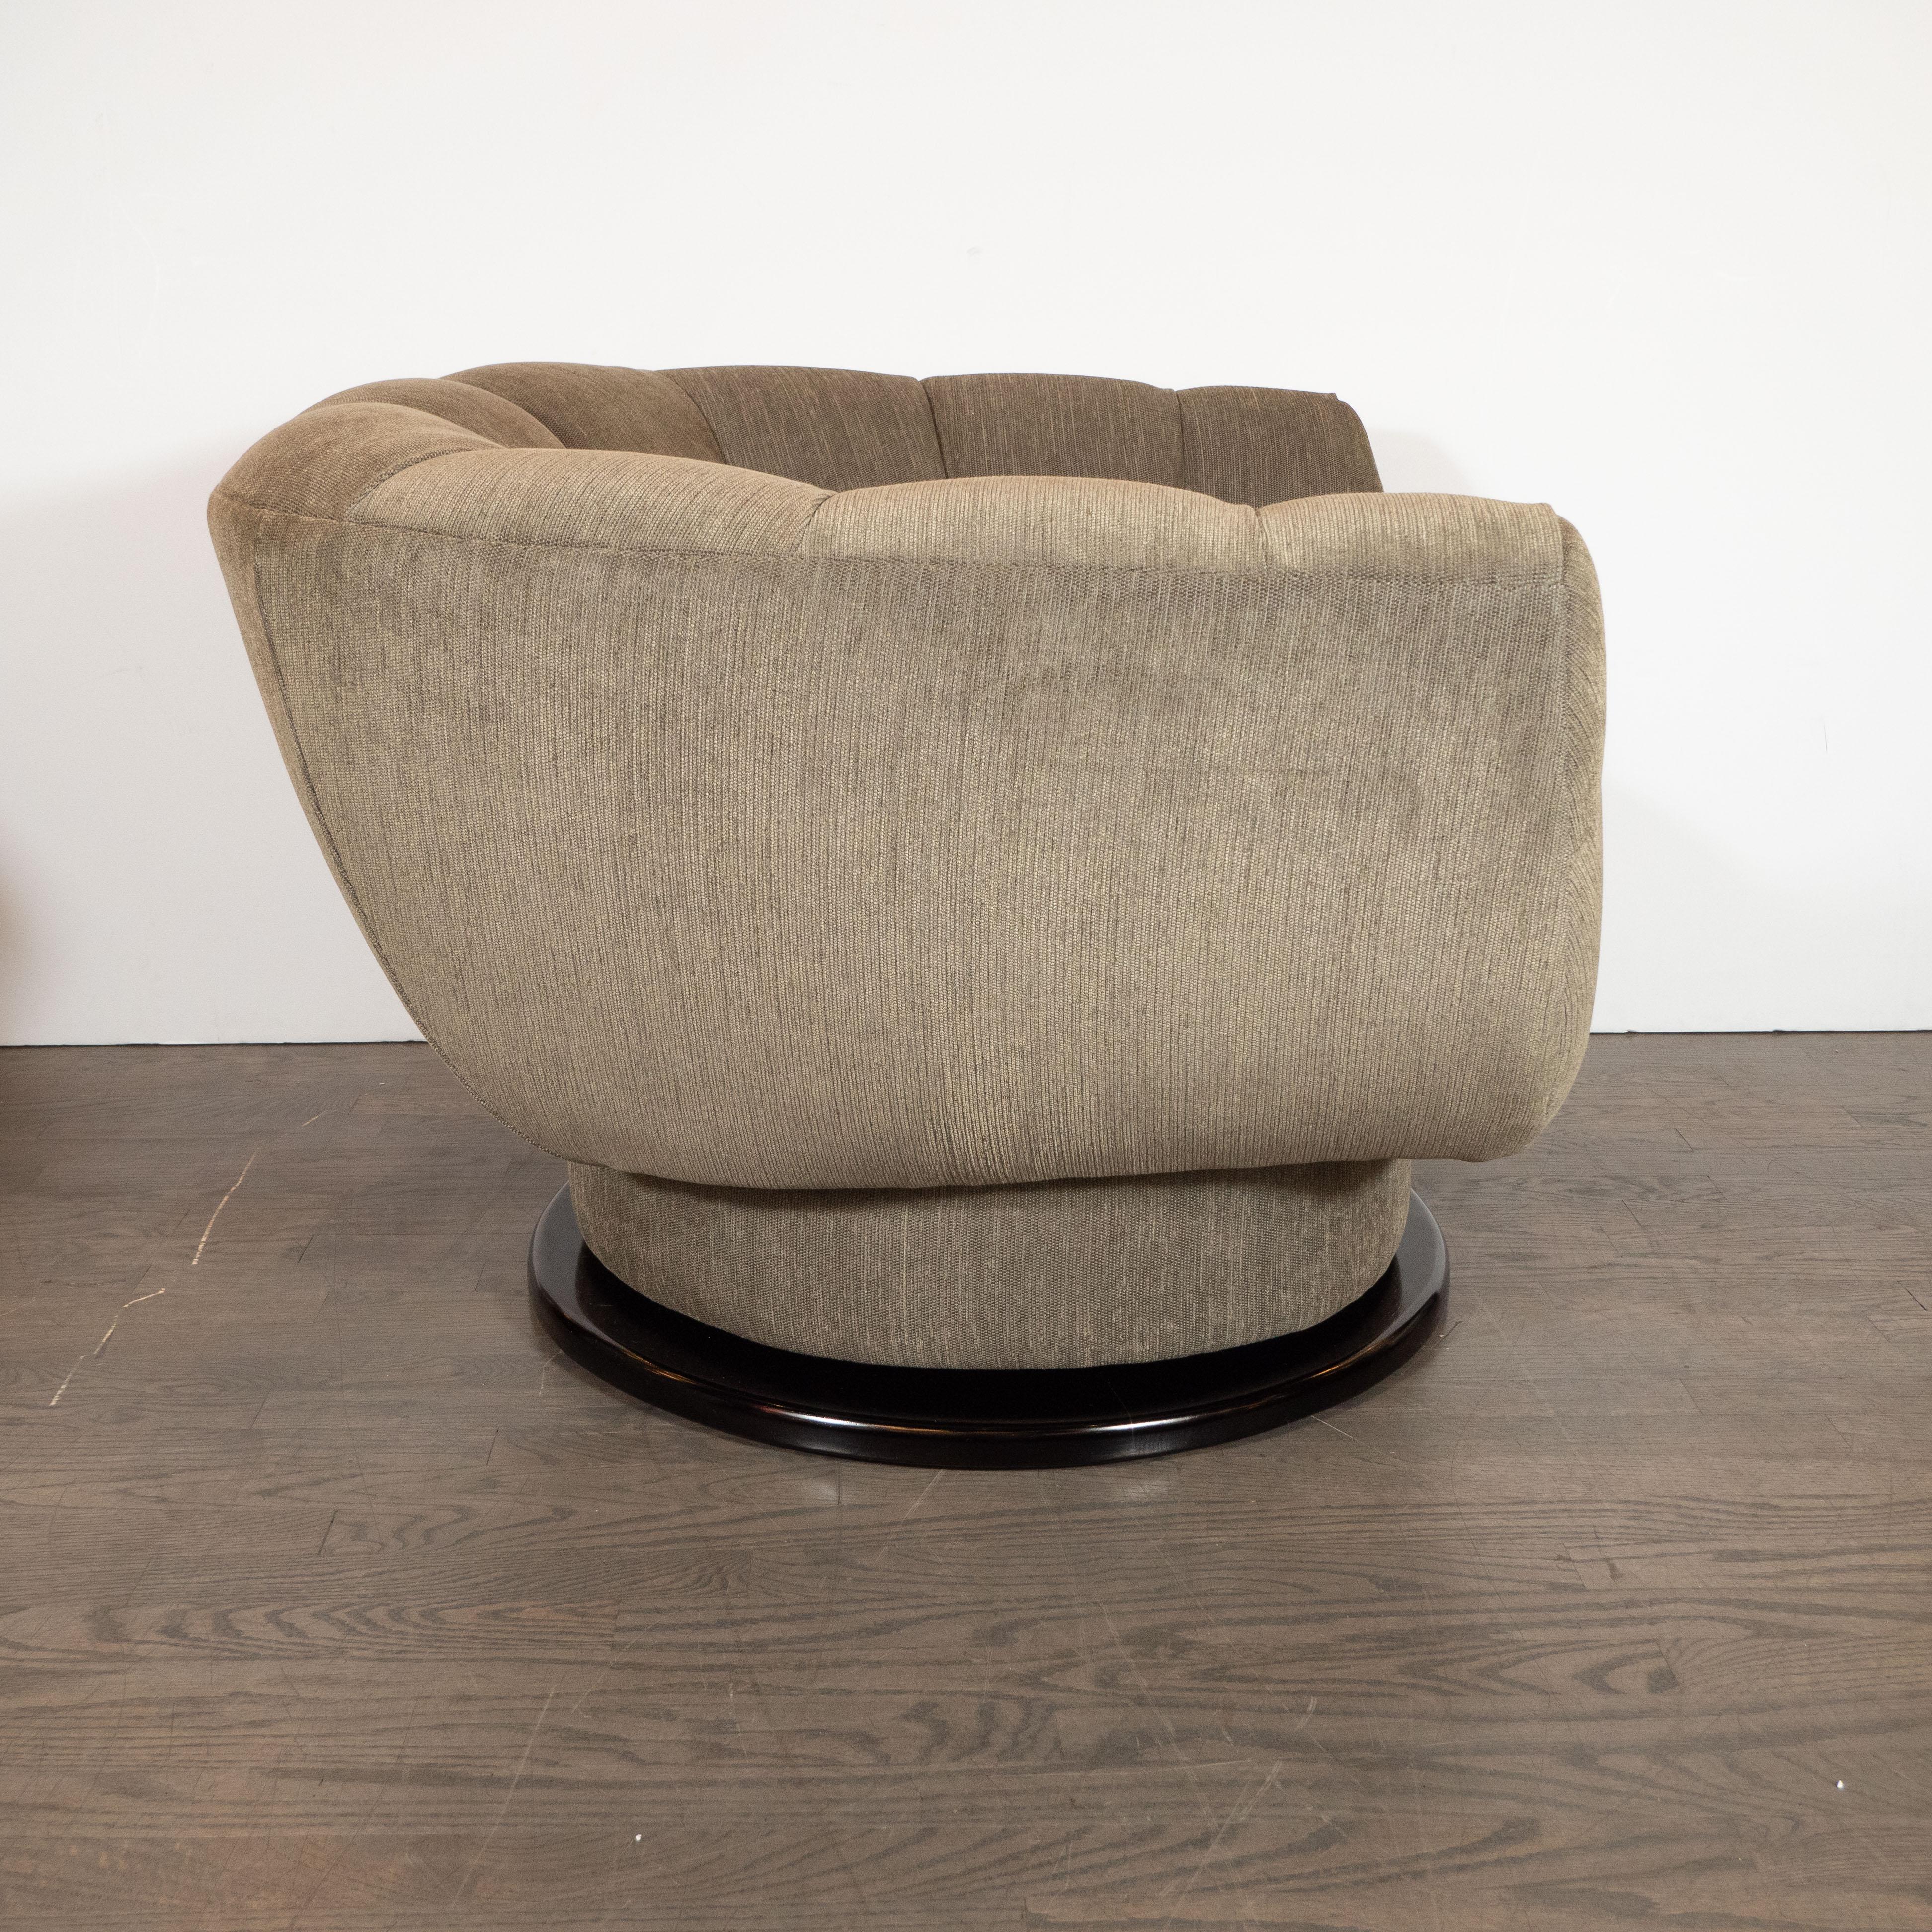 Late 20th Century Midcentury Biscuit Tufted Swivel Chair in Smoked Sage Fabric by Adrian Pearsall